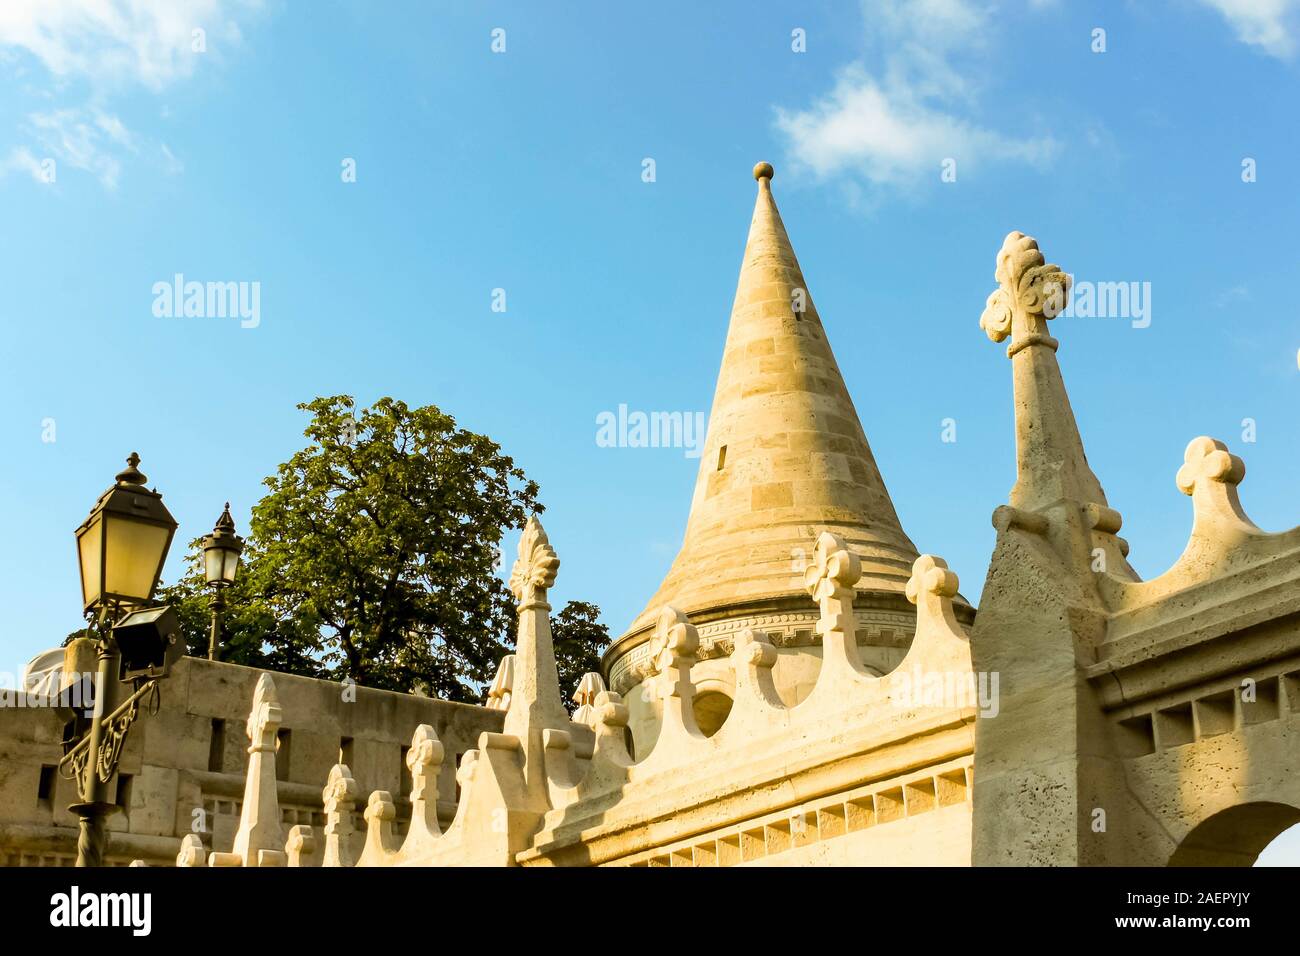 BUDAPEST, HUNGARY 29 JULY 2019: Fishermen's Bastion on the castle hill of Buda natural background view Stock Photo